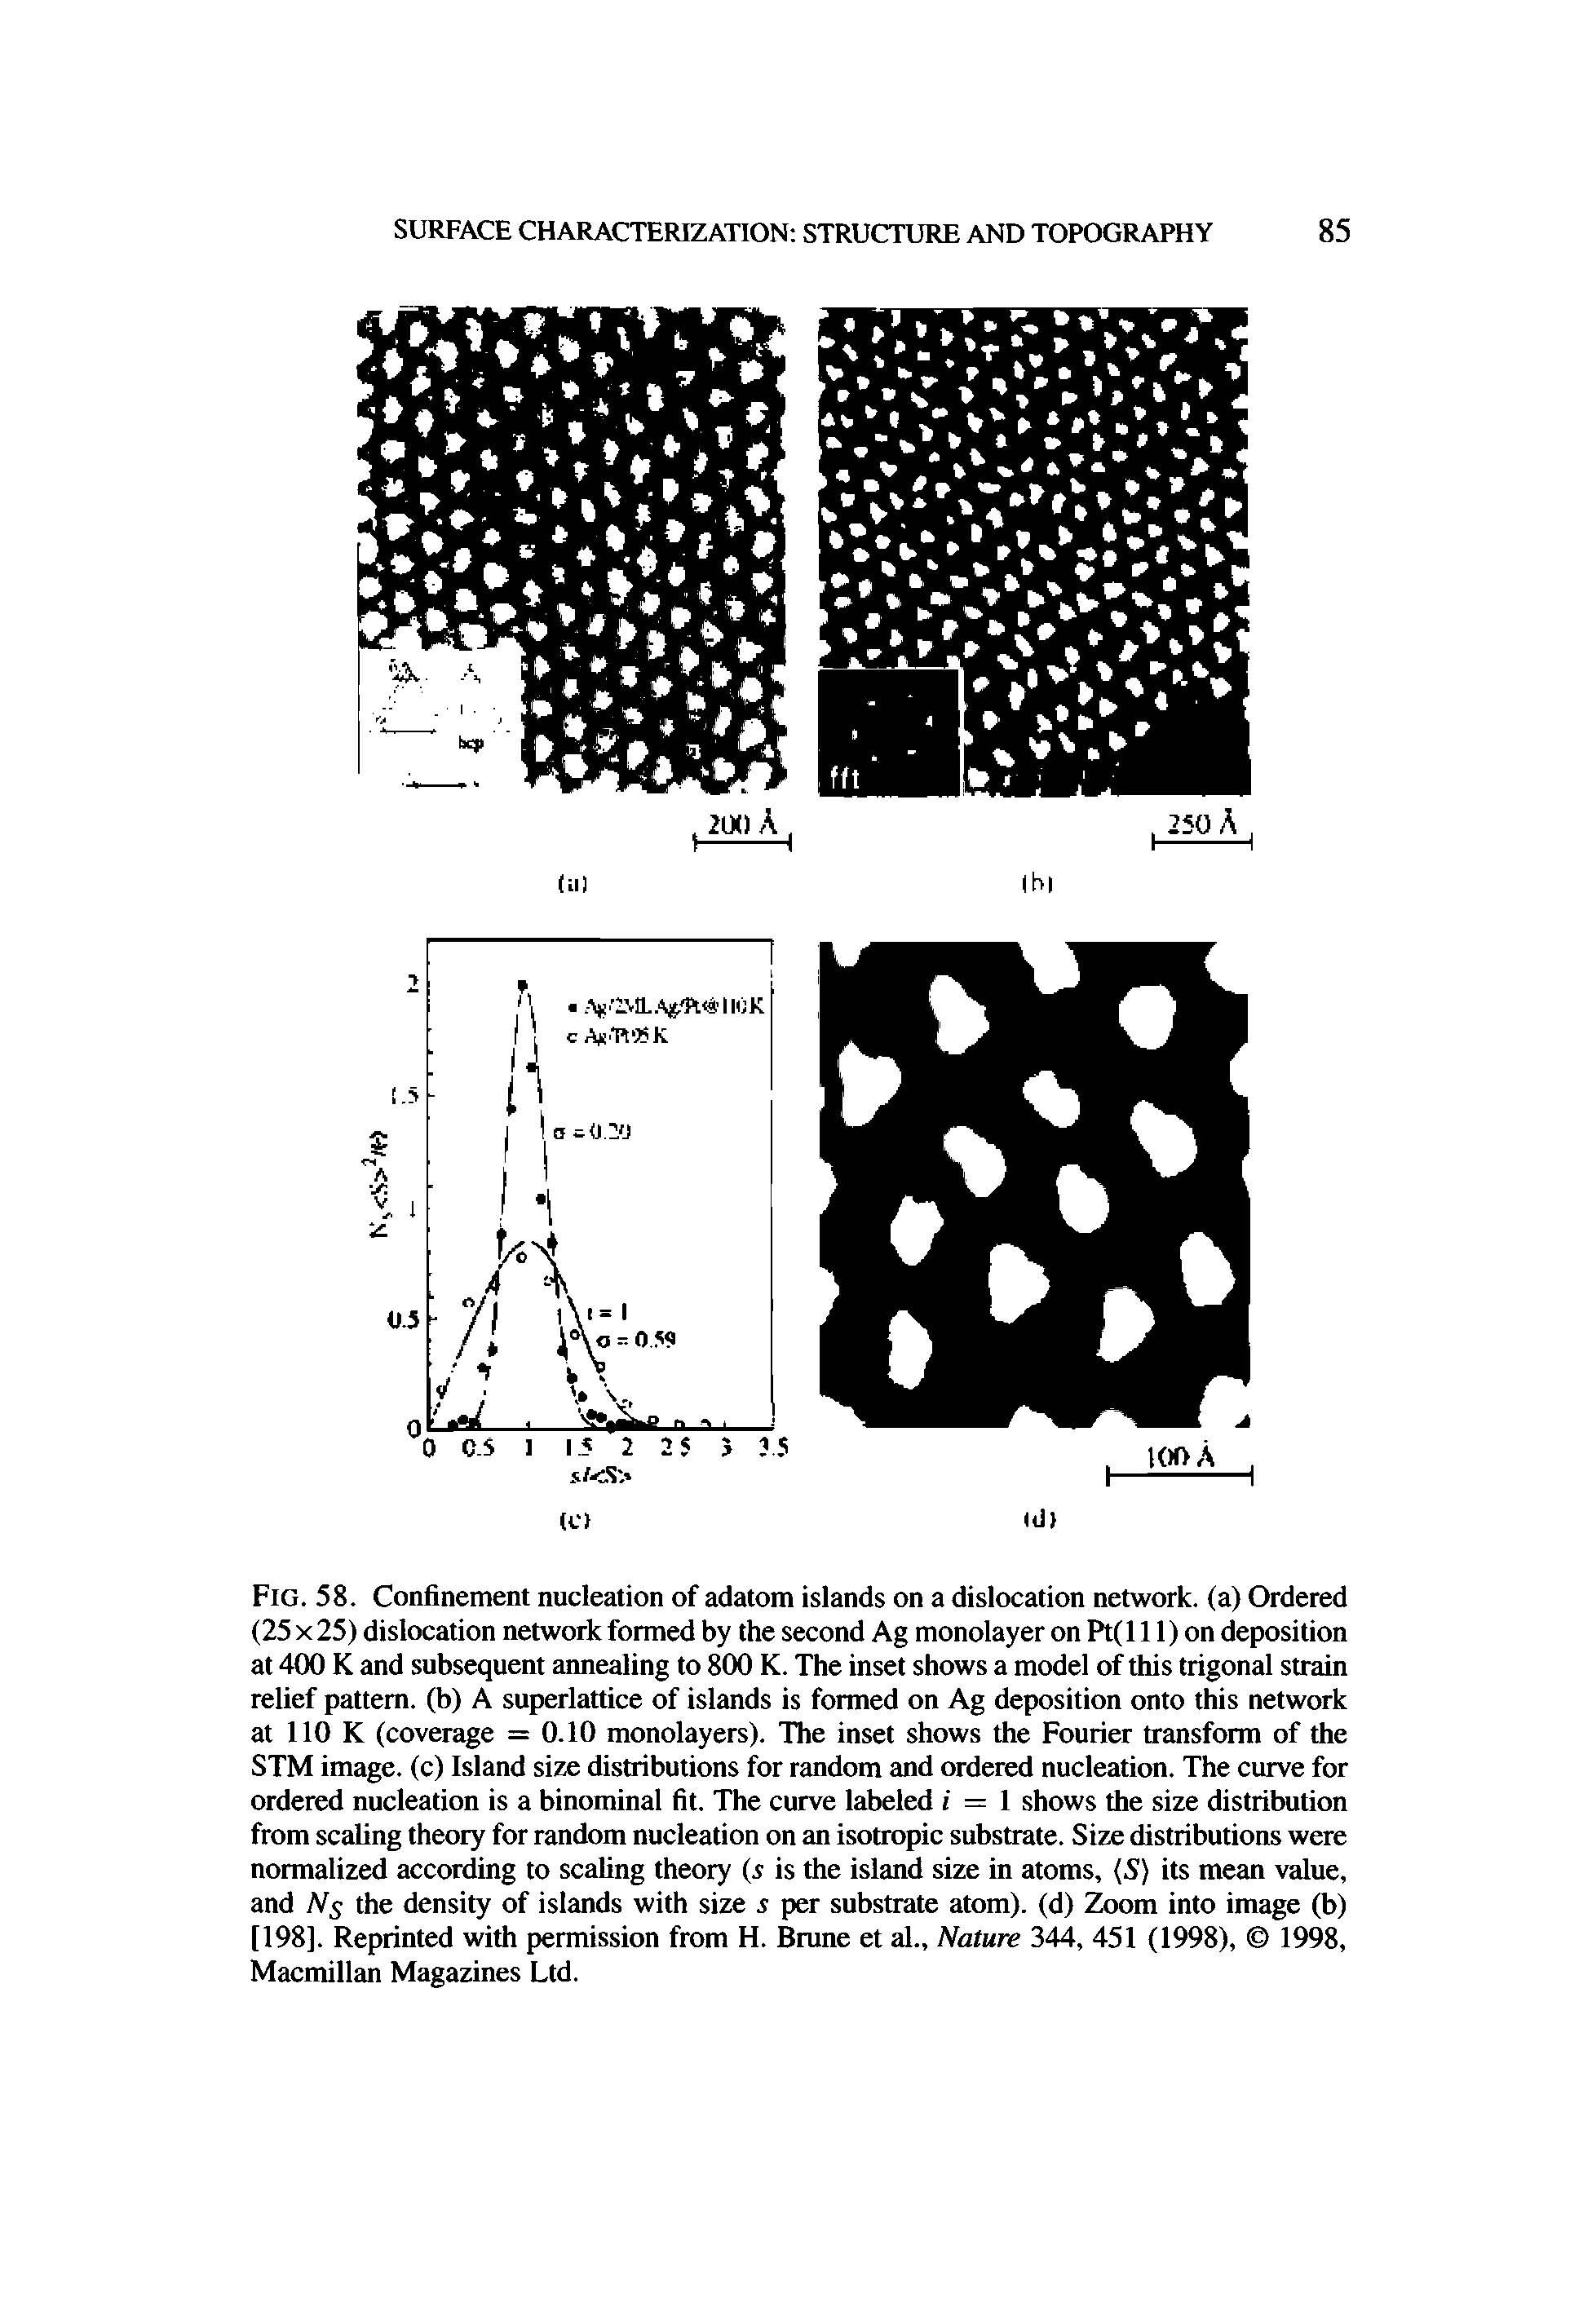 Fig. 58. Confinement nucleation of adatom islands on a dislocation network, (a) Ordered (25 X 25) dislocation network formed by the second Ag monolayer on Pt( 111) on deposition at 400 K and subsequent annealing to 800 K. The inset shows a model of this trigonal strain relief pattern, (b) A superlattice of islands is formed on Ag deposition onto this network at 110 K (coverage = 0.10 monolayers). The inset shows the Fourier transform of the STM image, (c) Island size distributions for random and ordered nucleation. The curve for ordered nucleation is a binominal fit. The curve labeled i = 1 shows the size distribution from scaling theory for random nucleation on an isotropic substrate. Size distributions were normalized according to scaling theory (5 is the island size in atoms, (S) its mean value, and Ns the density of islands with size s per substrate atom), (d) Zoom into image (b) [198]. Reprinted with permission from H. Brune et al.. Nature 344, 451 (1998), 1998, Macmillan Magazines Ltd.